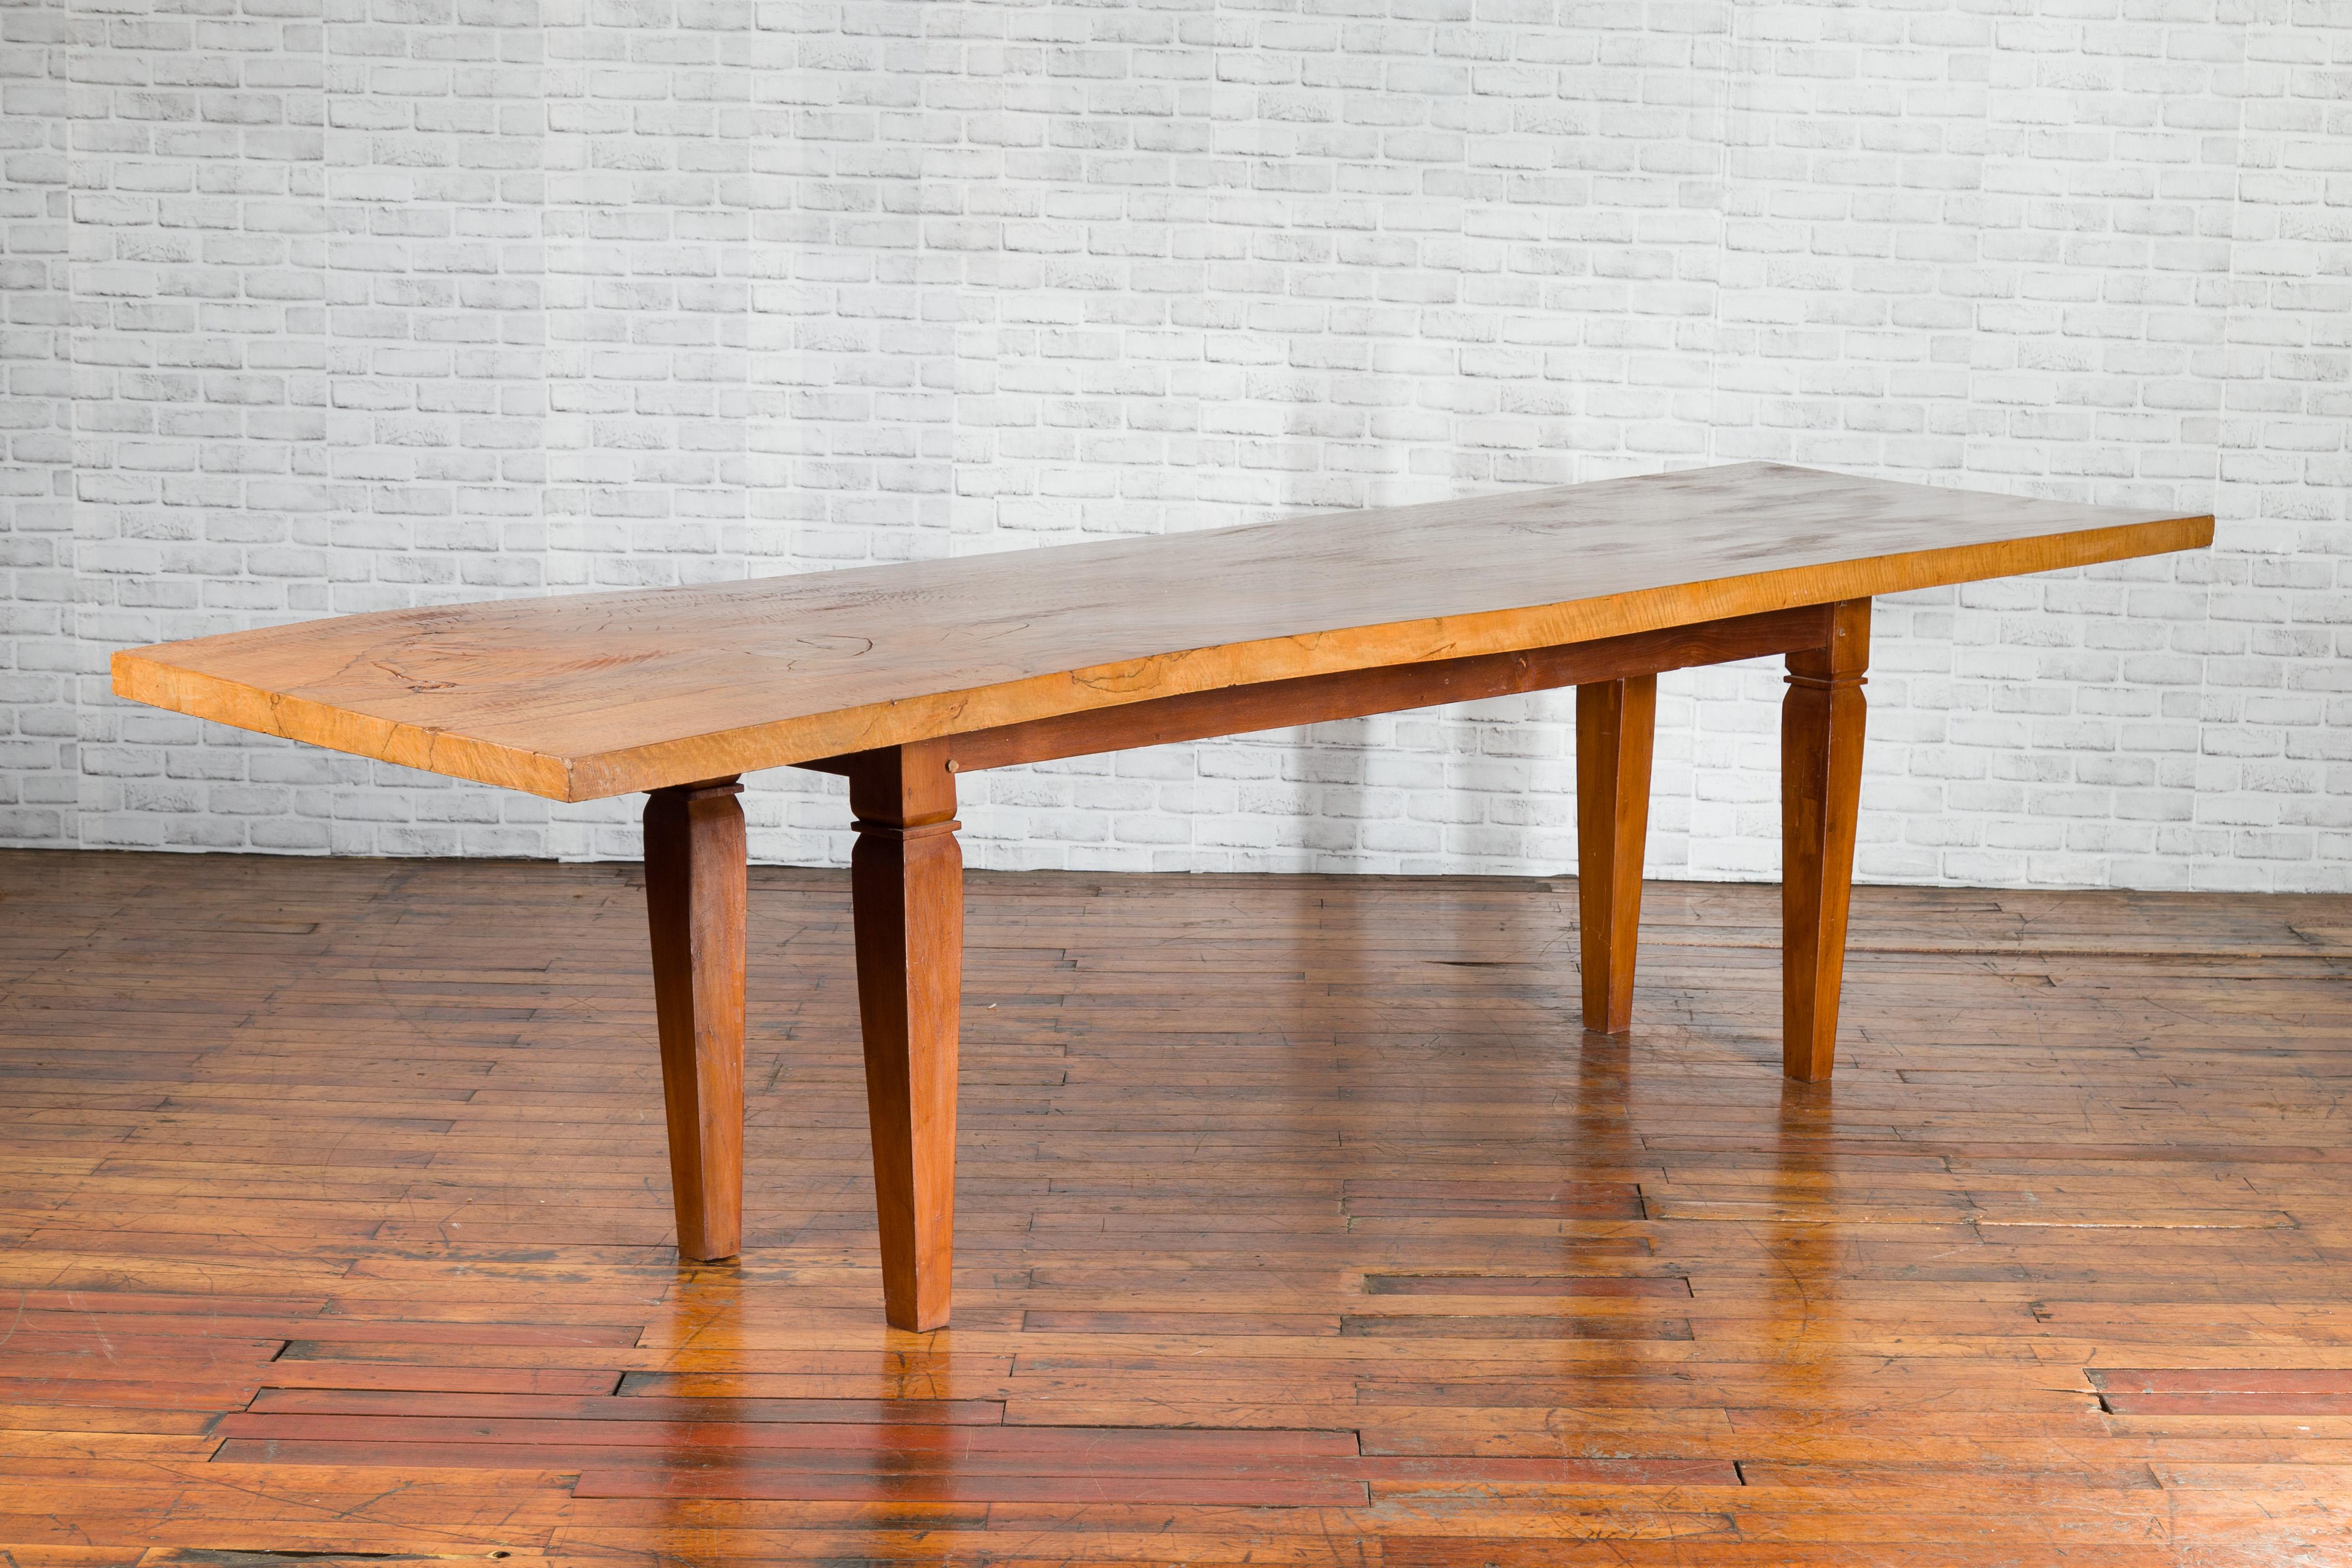 A vintage Indonesian large dining table from the mid 20th century, with mango wood top and tapered legs. Created in Indonesia during the midcentury period, this large dining table features a rectangular single plank mango wood top with nicely